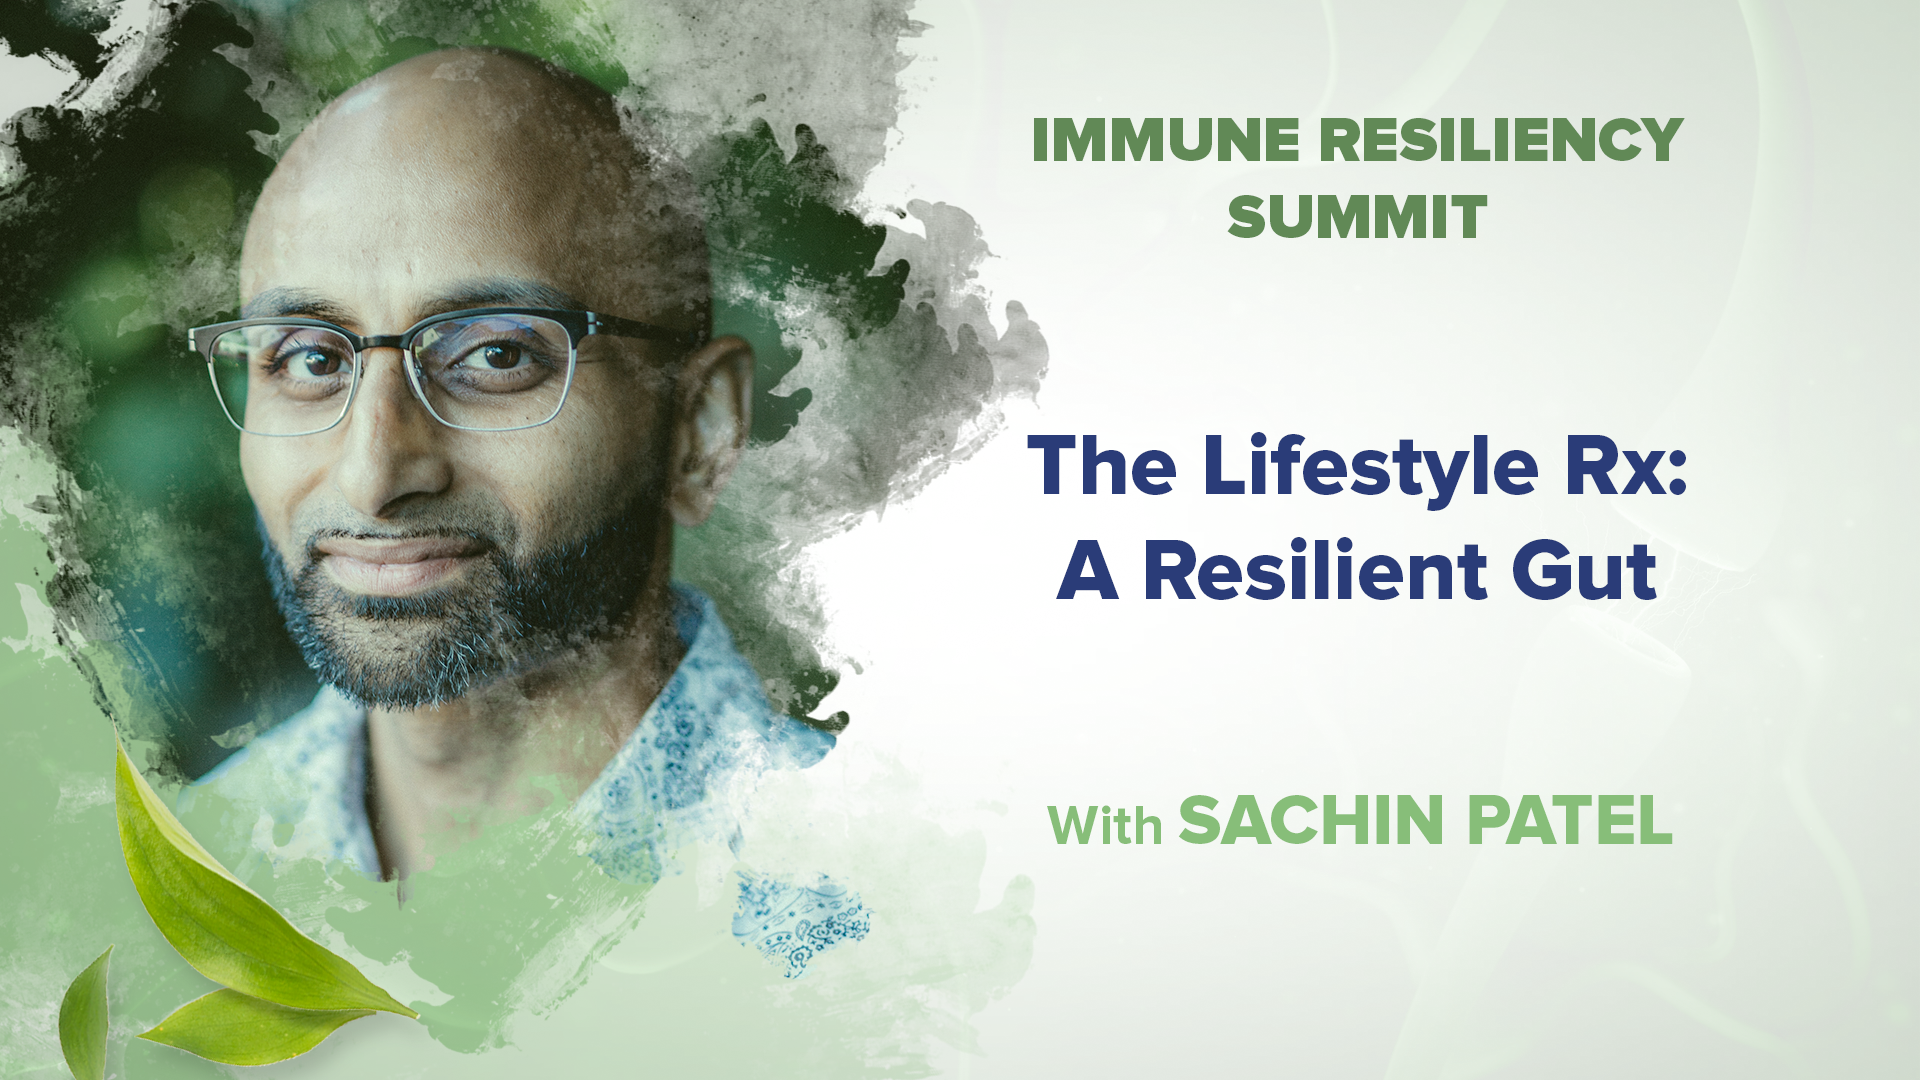 The Lifestyle Rx: A Resilient Gut